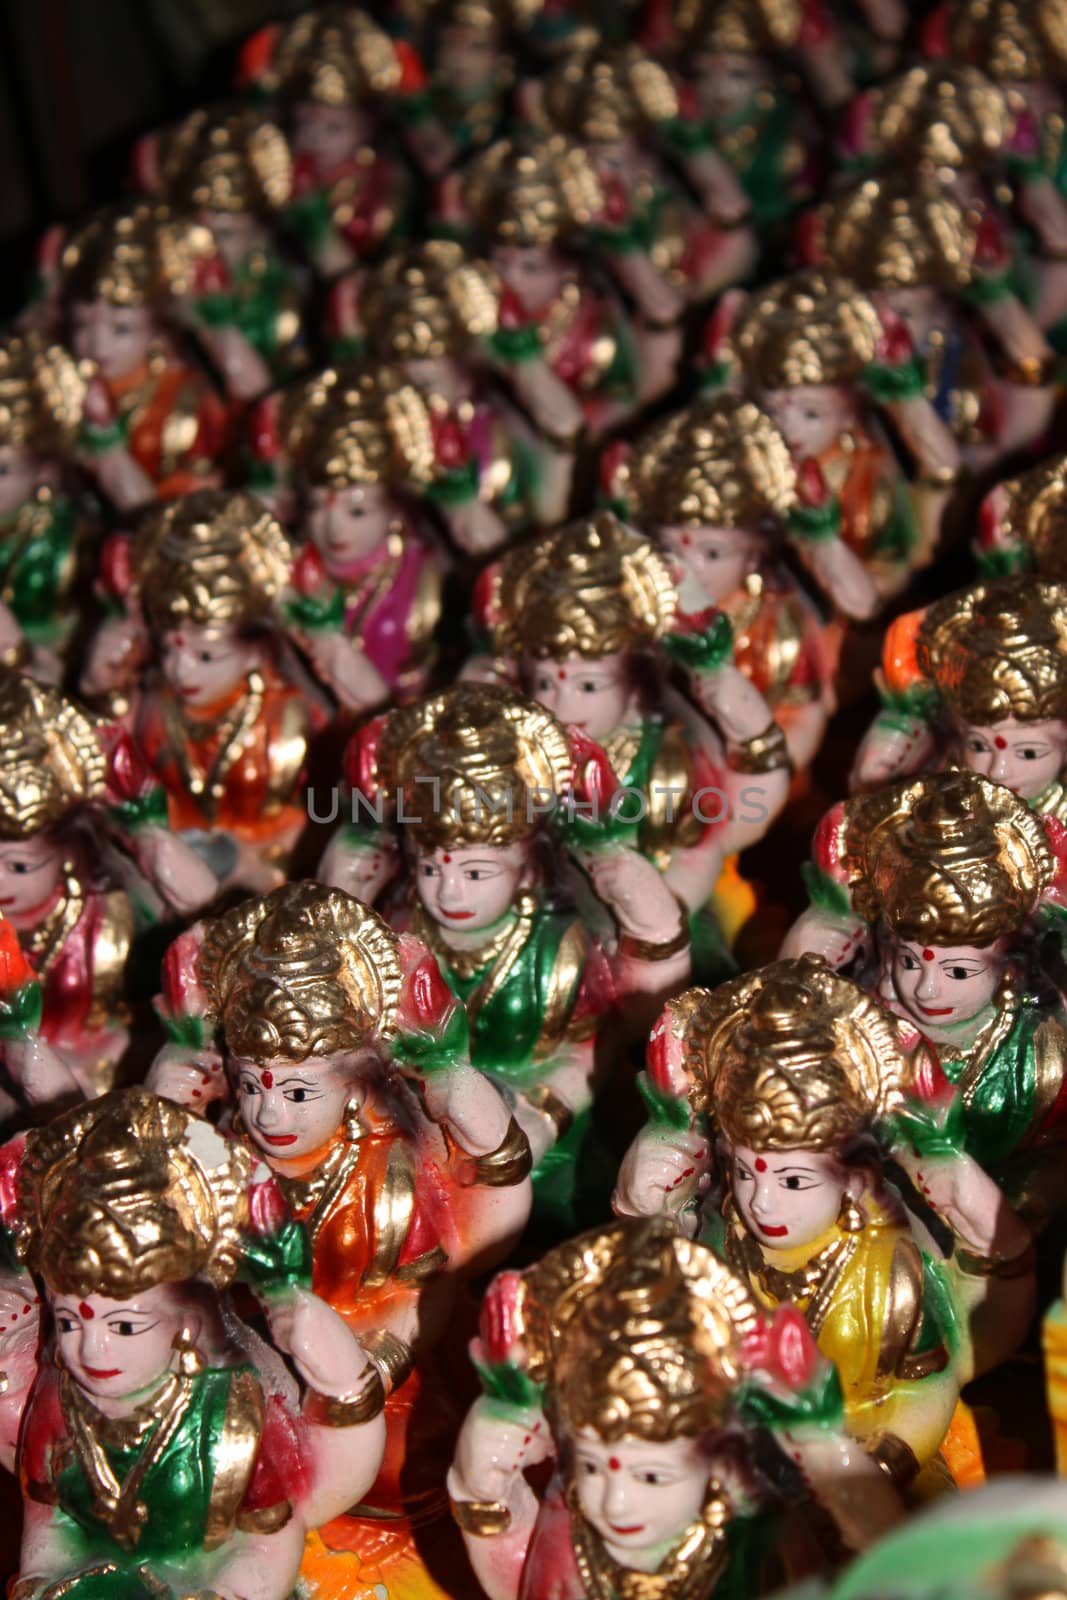 Old Idols of Indian Goddess Laxmi in a potters shop.